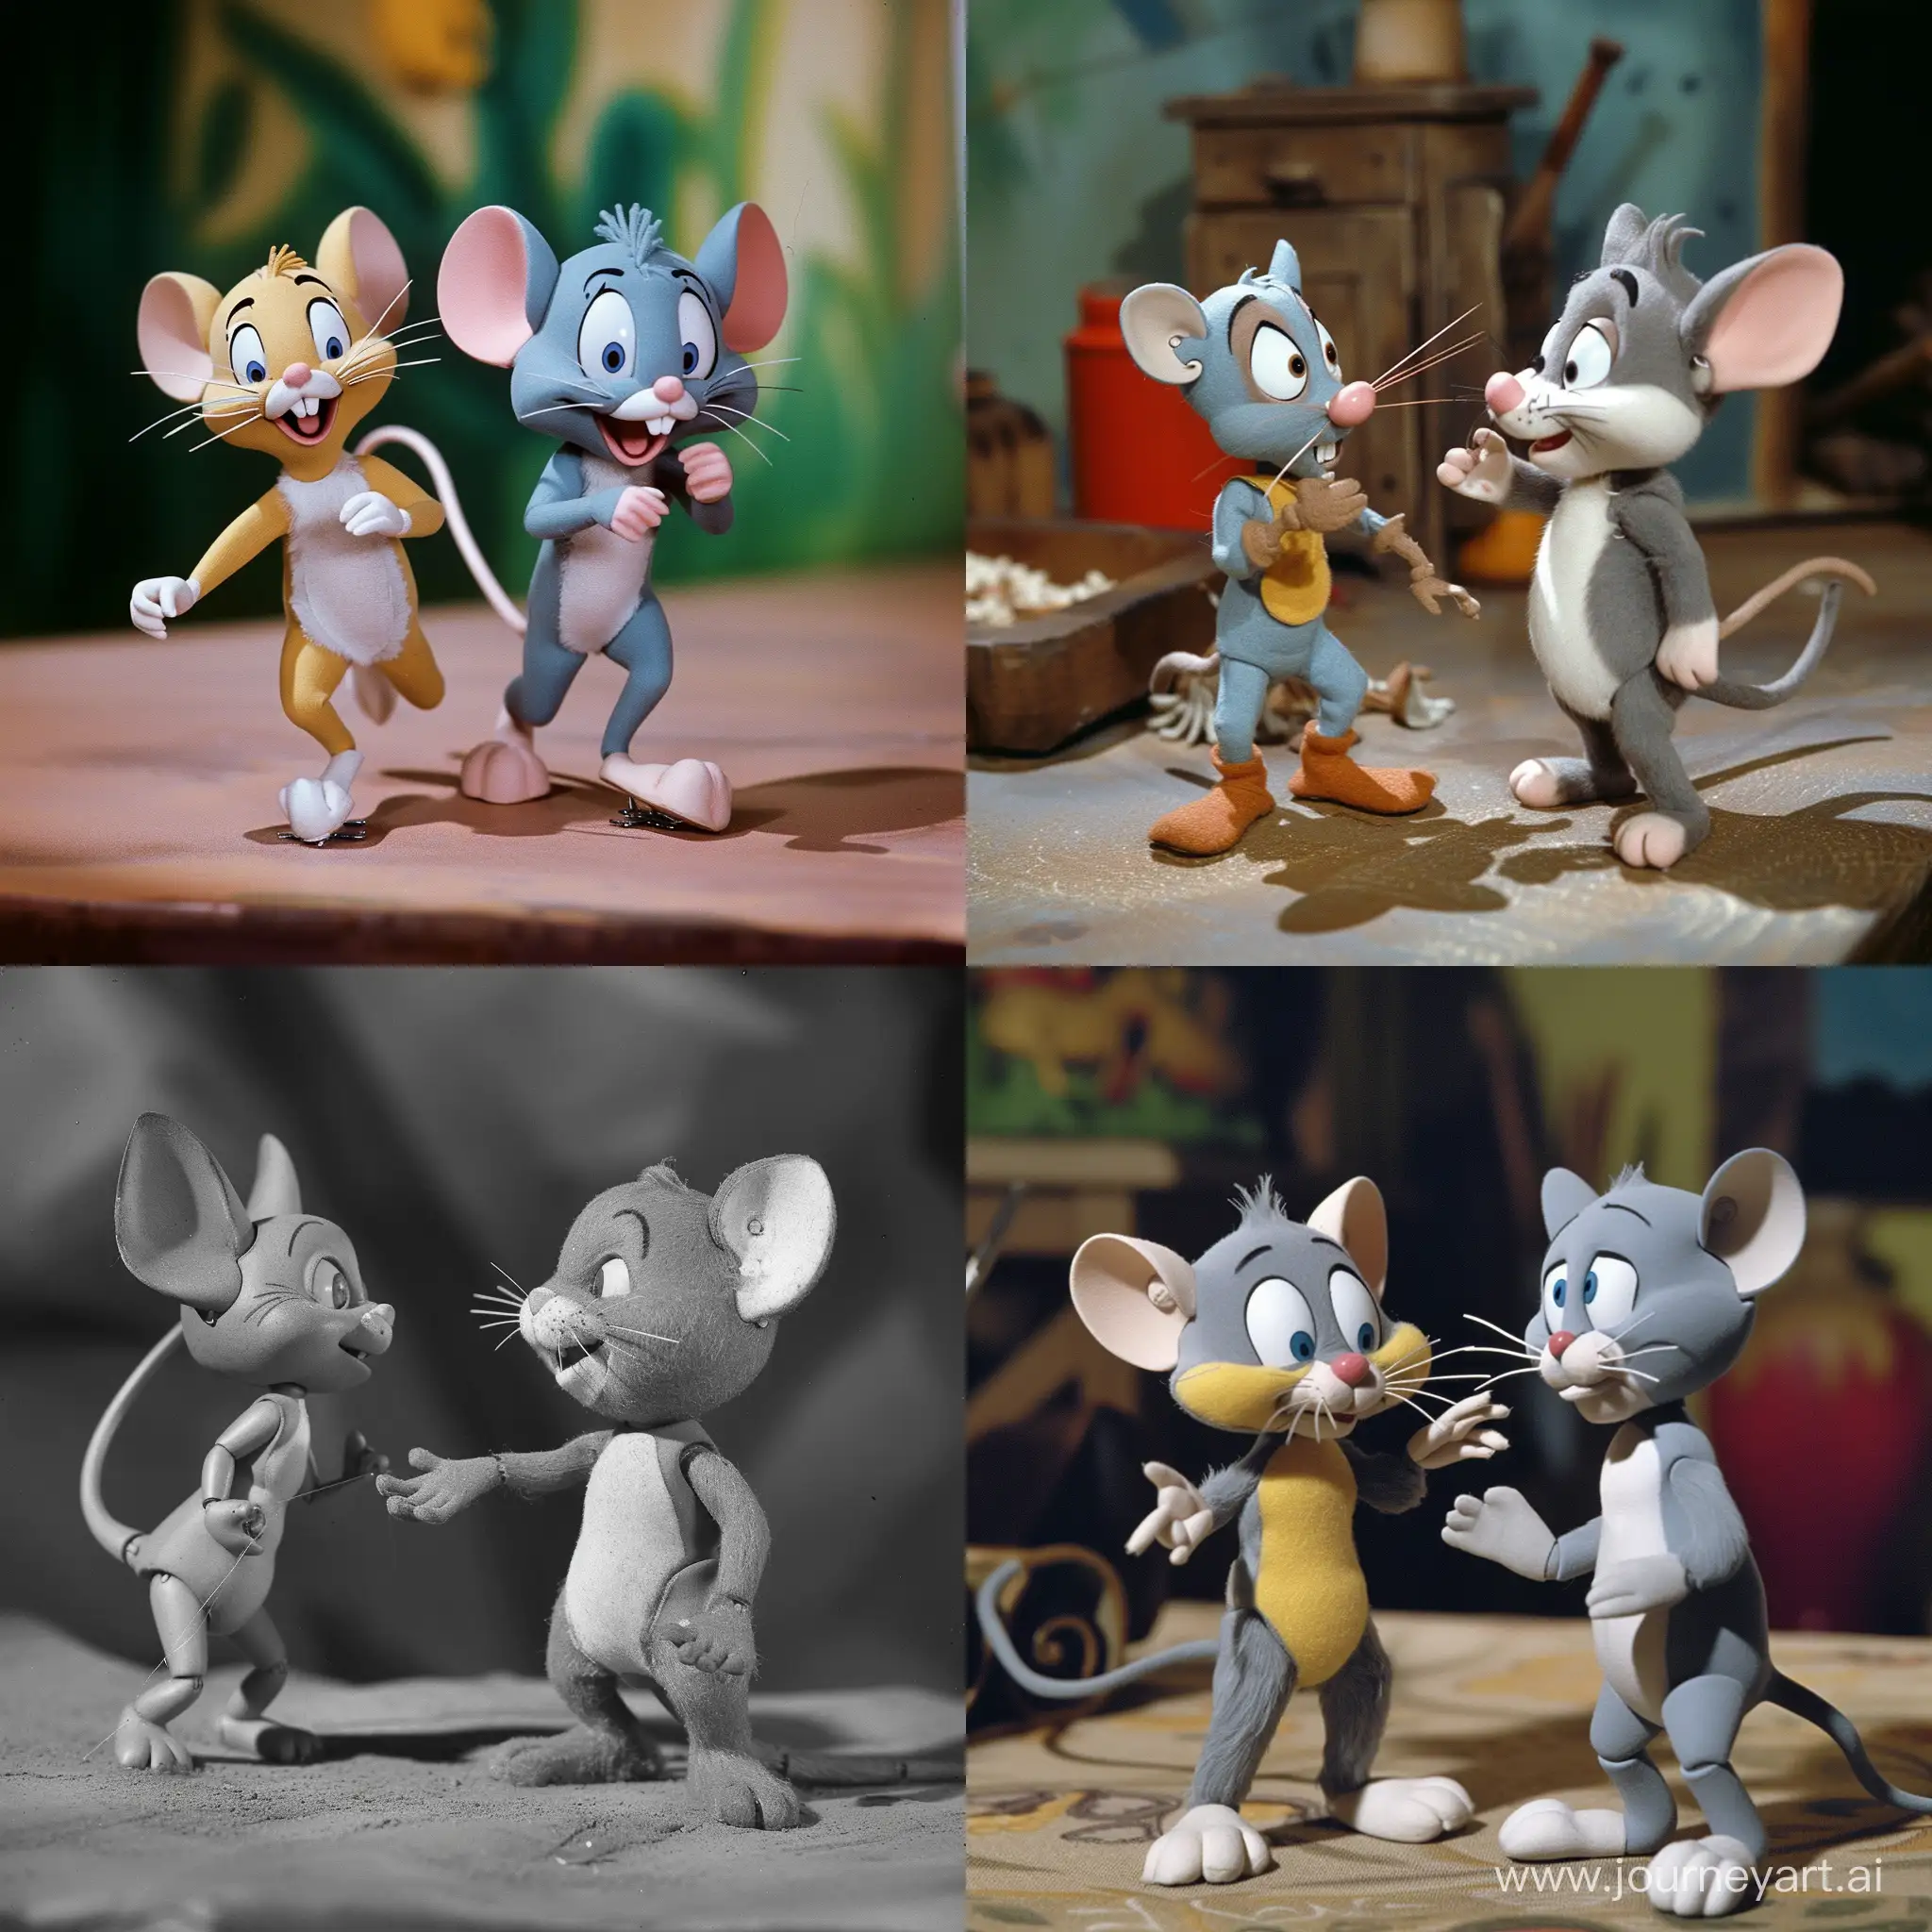 Classic-1950s-Stop-Motion-Film-Tom-and-Jerry-Adventure